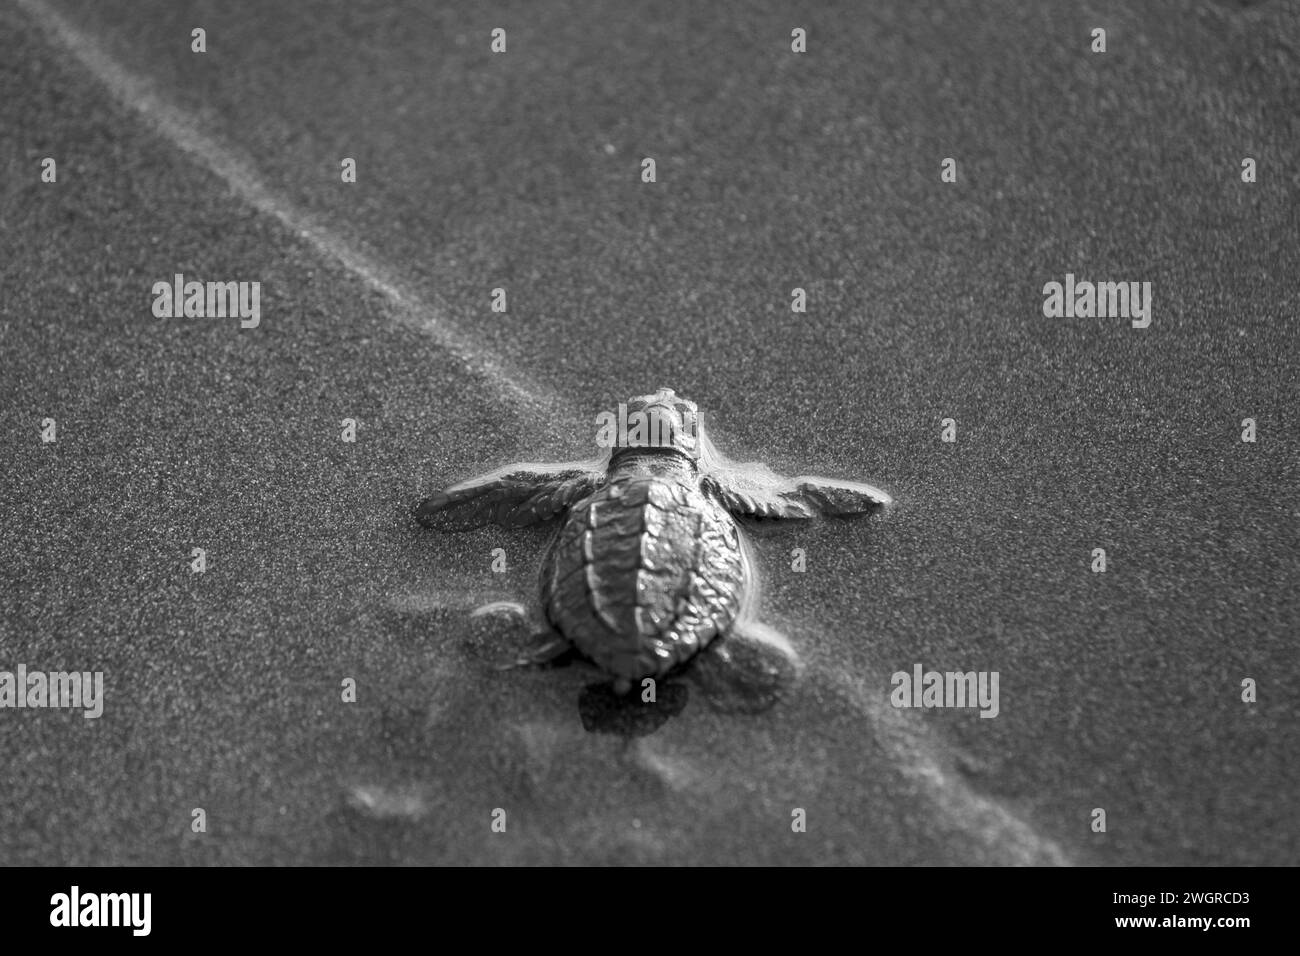 Newly hatched green olive Ridley turtle on sandy beach, Quepos, Costa Rica Stock Photo